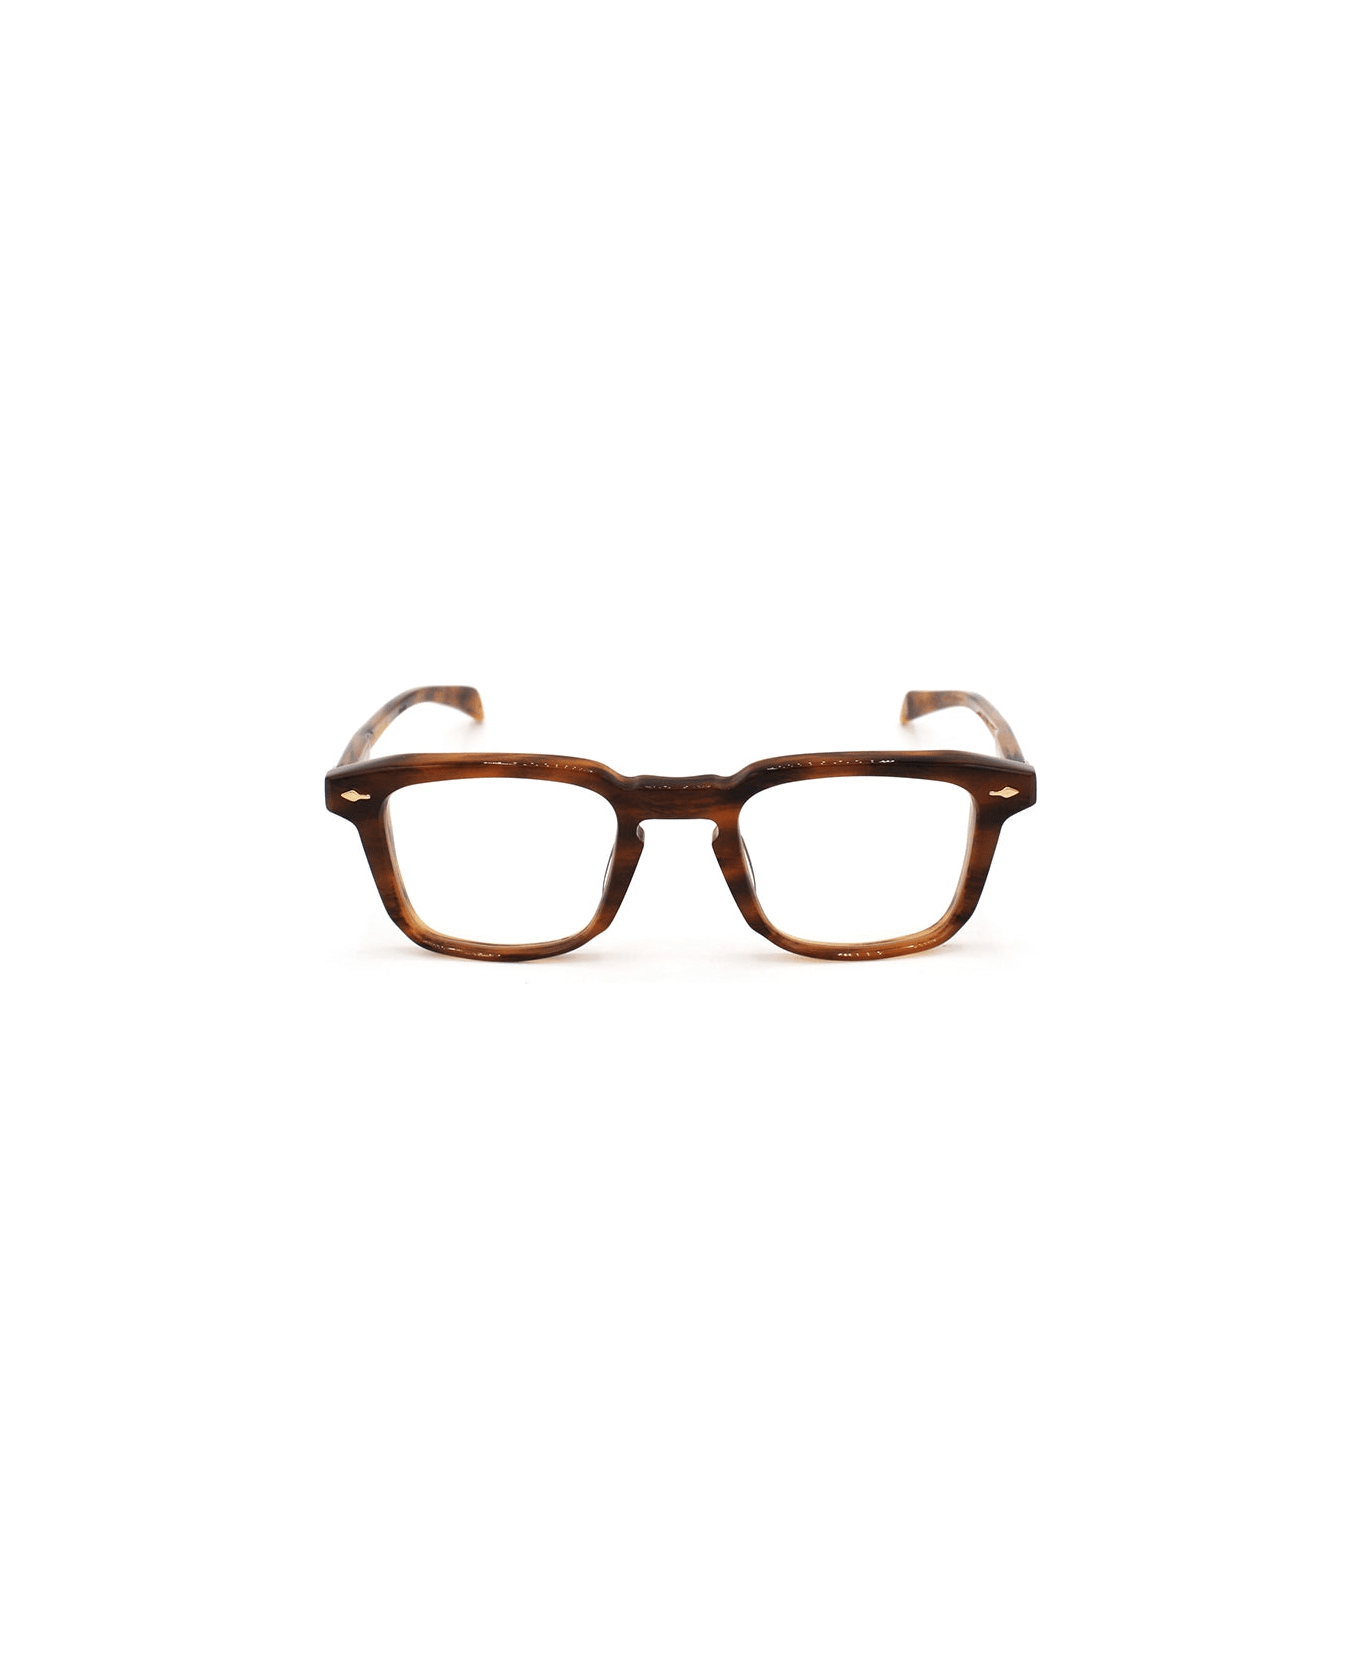 Jacques Marie Mage Prudhon - Oak Glasses - brown